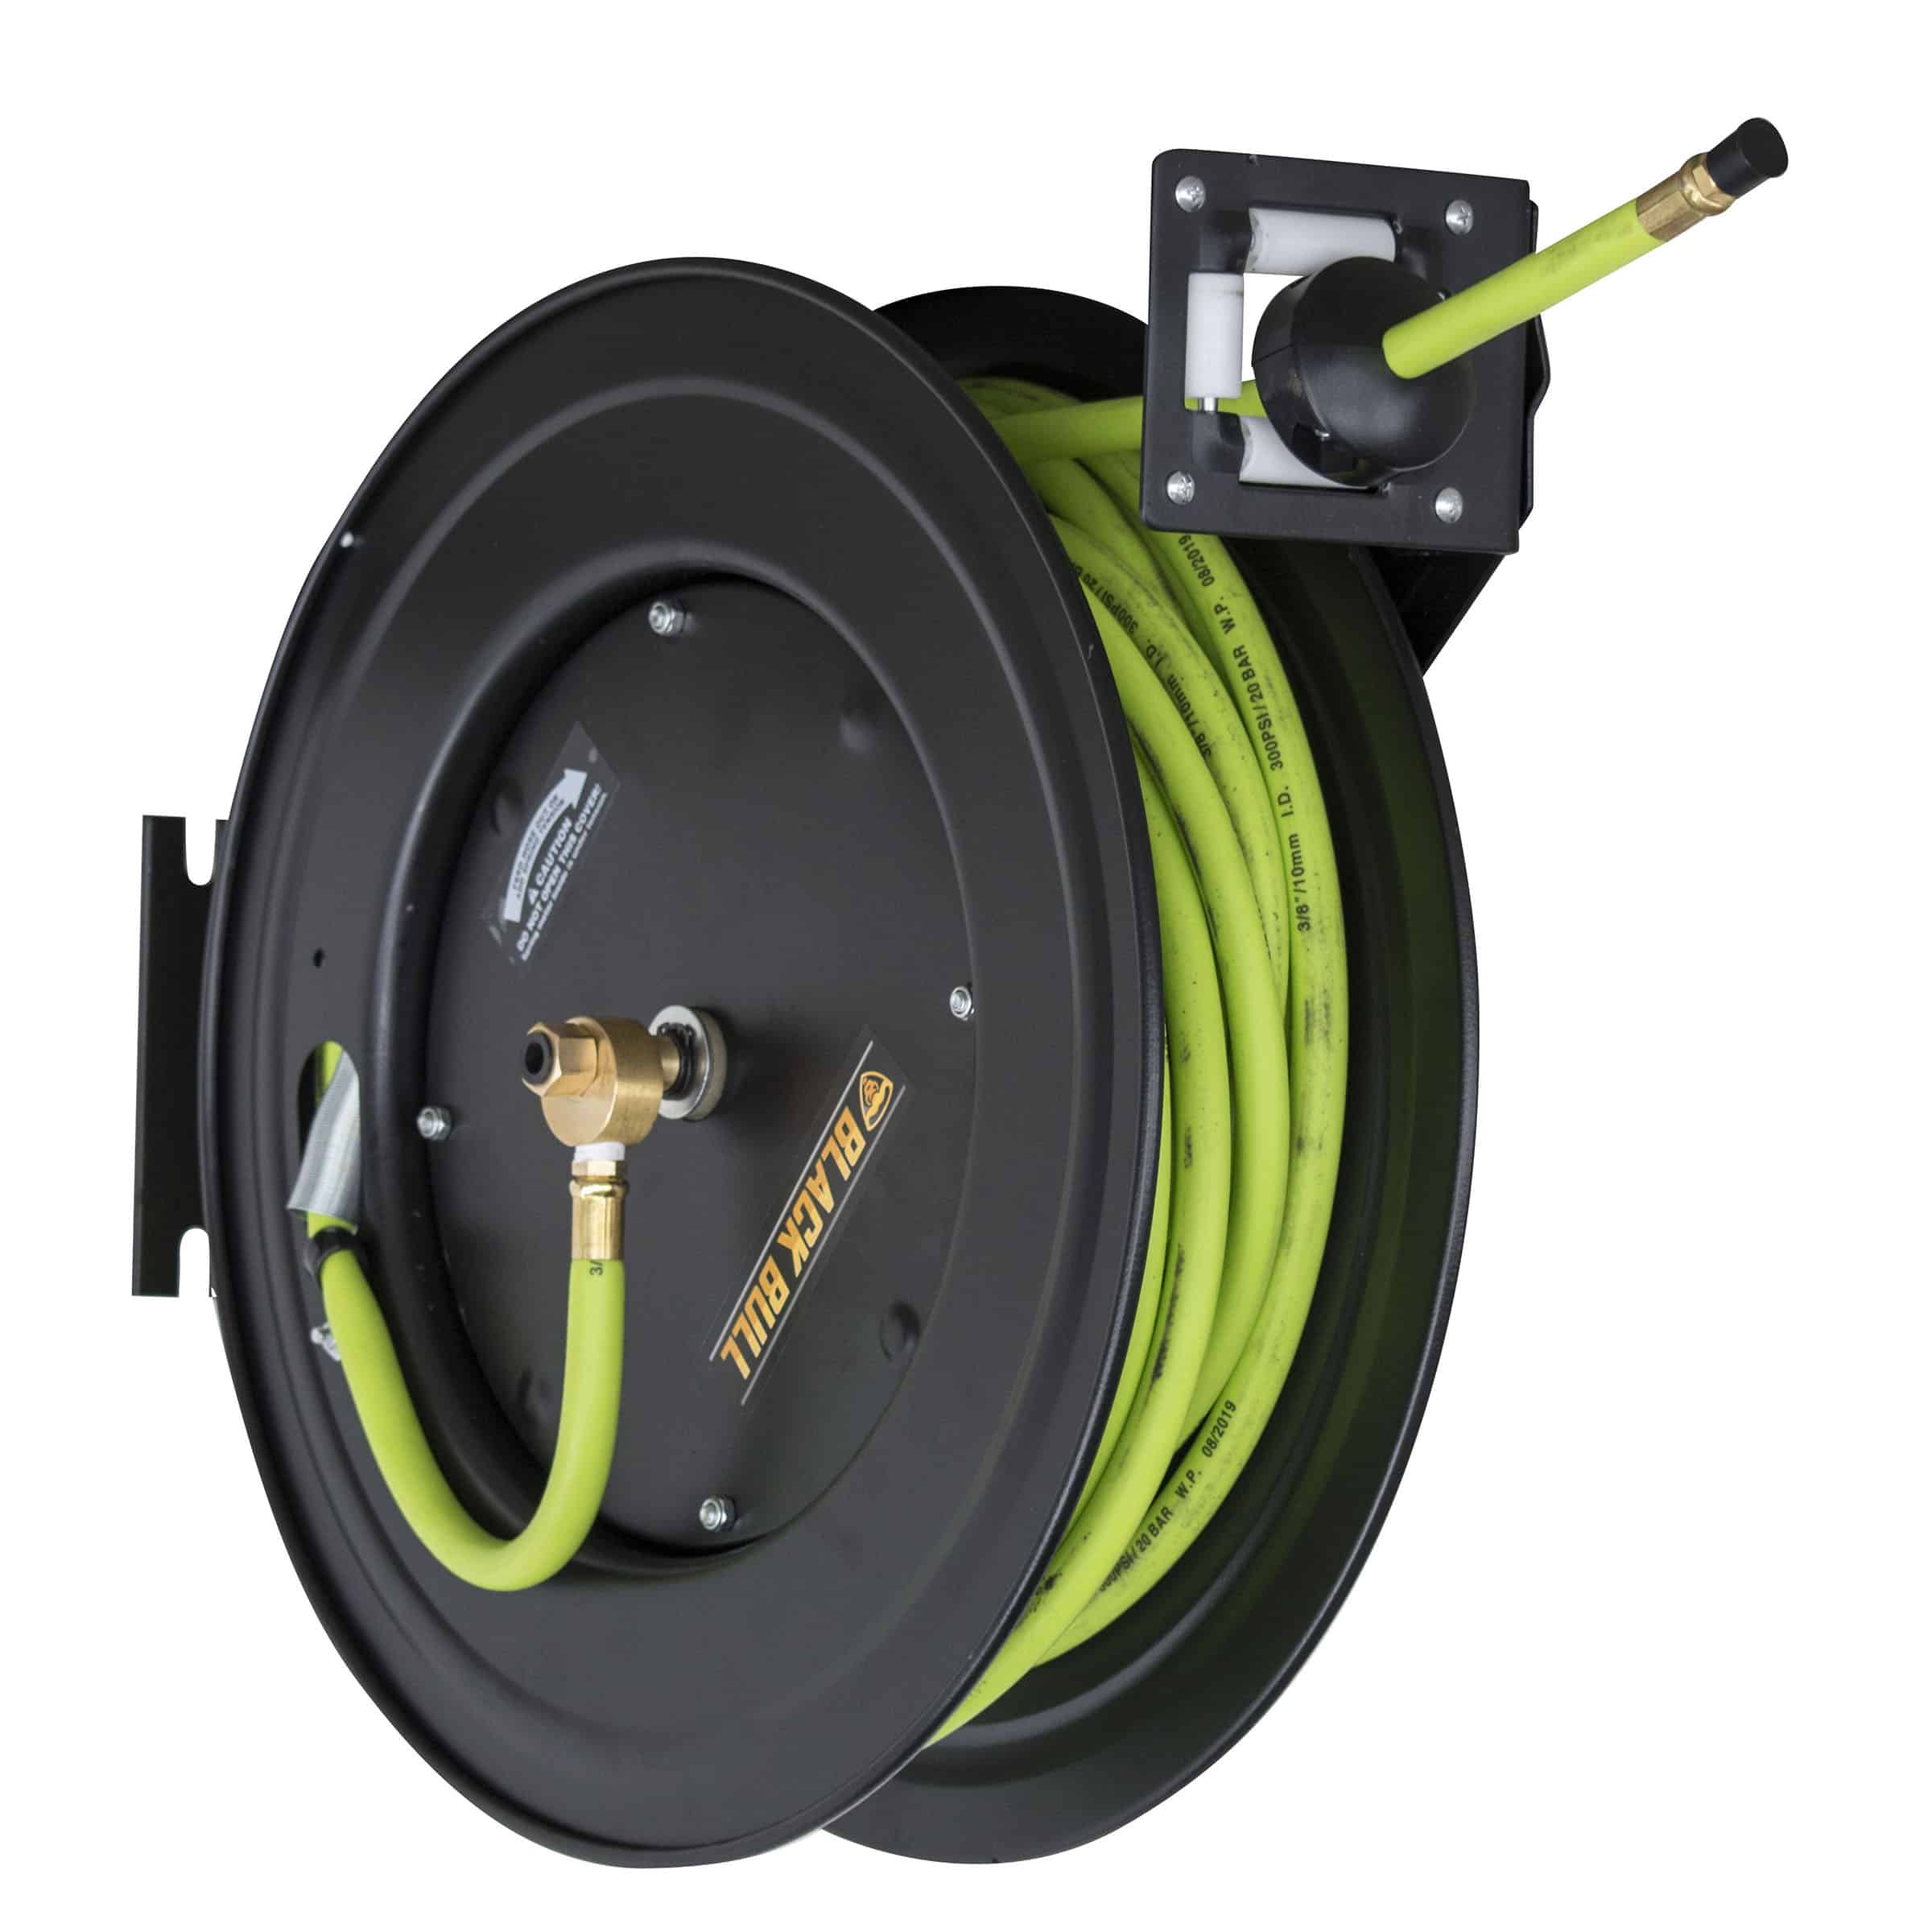 50 Foot Retractable Air Hose Reel with Auto Rewind - Black Bull 